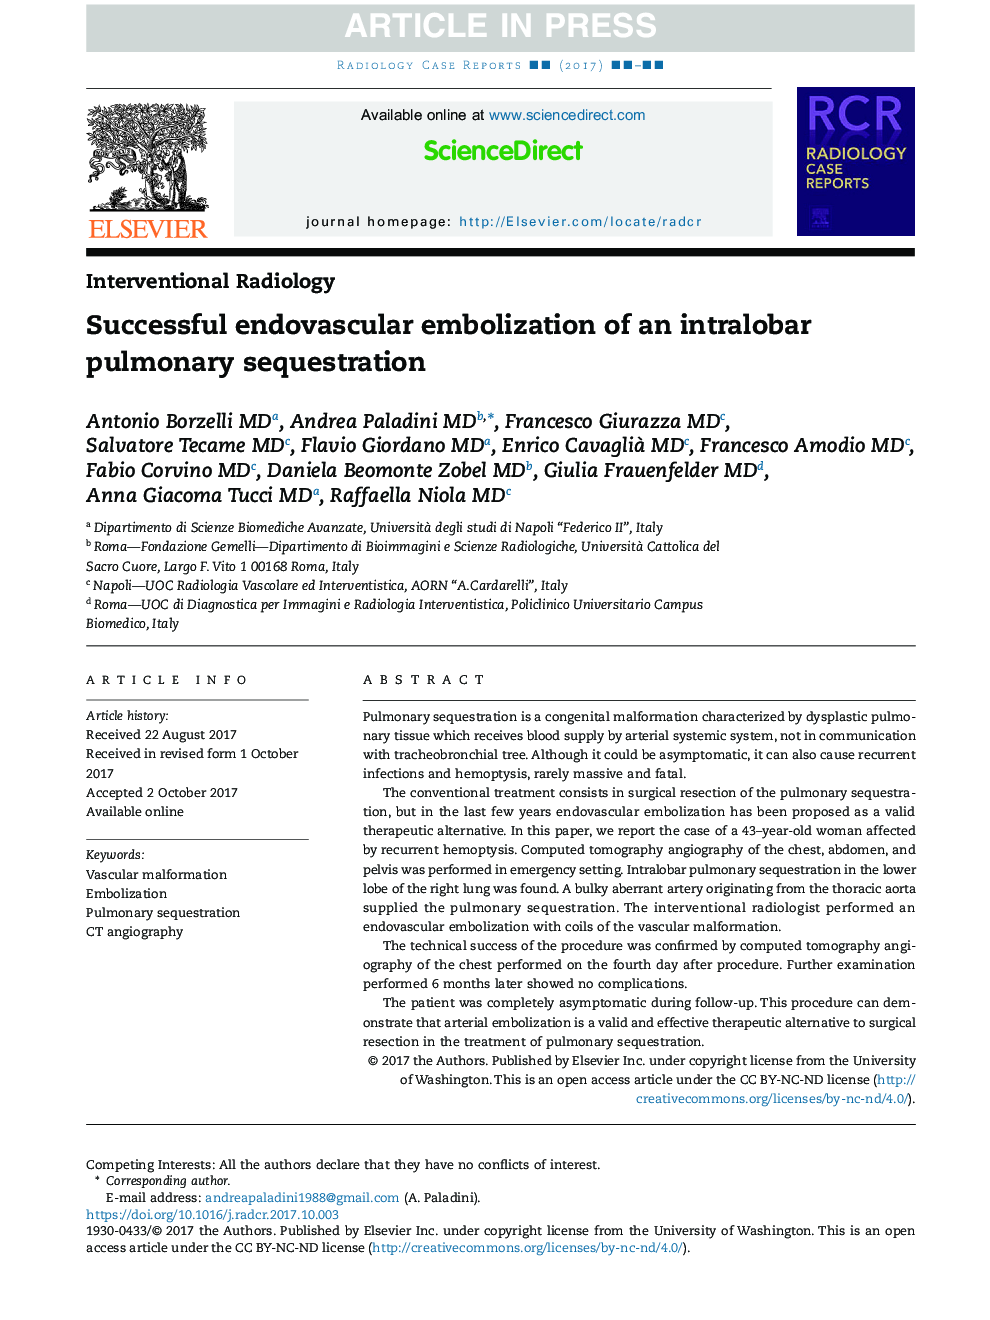 Successful endovascular embolization of an intralobar pulmonary sequestration